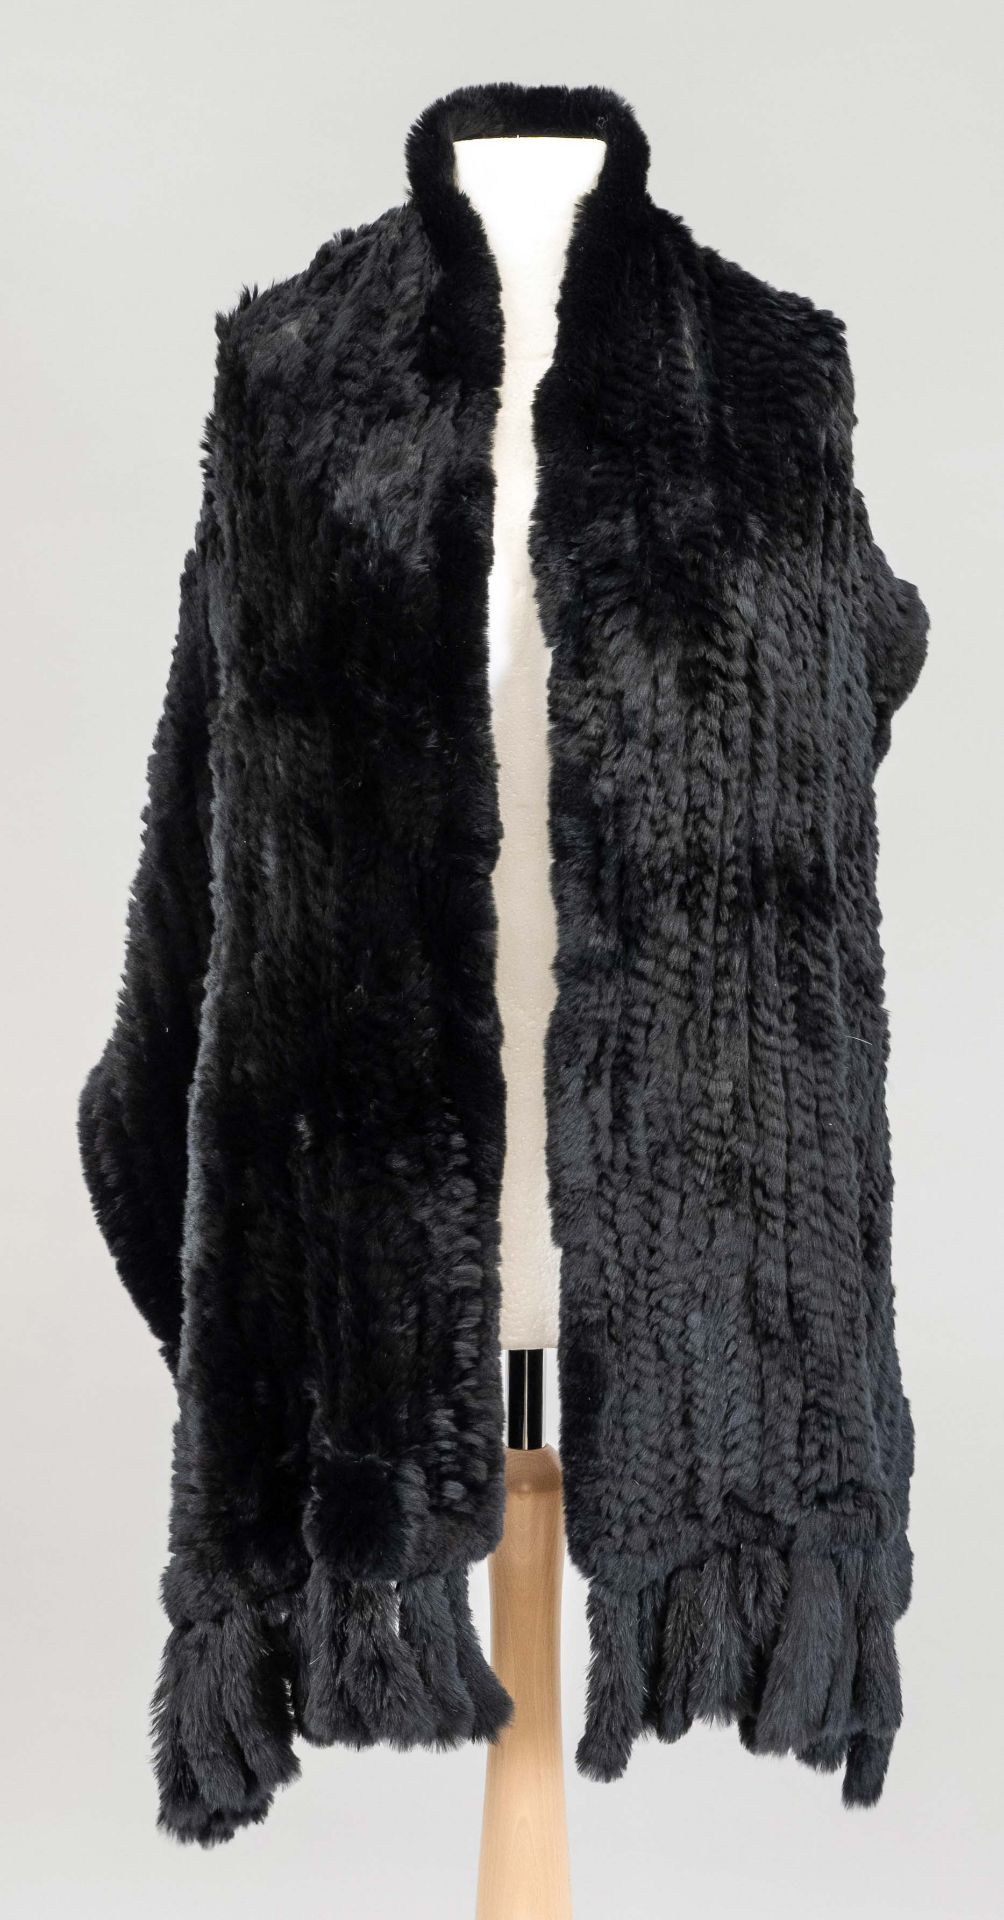 Ladies fur scarf, on a label marked Rolf Schulte, without size indication, light traces of wear